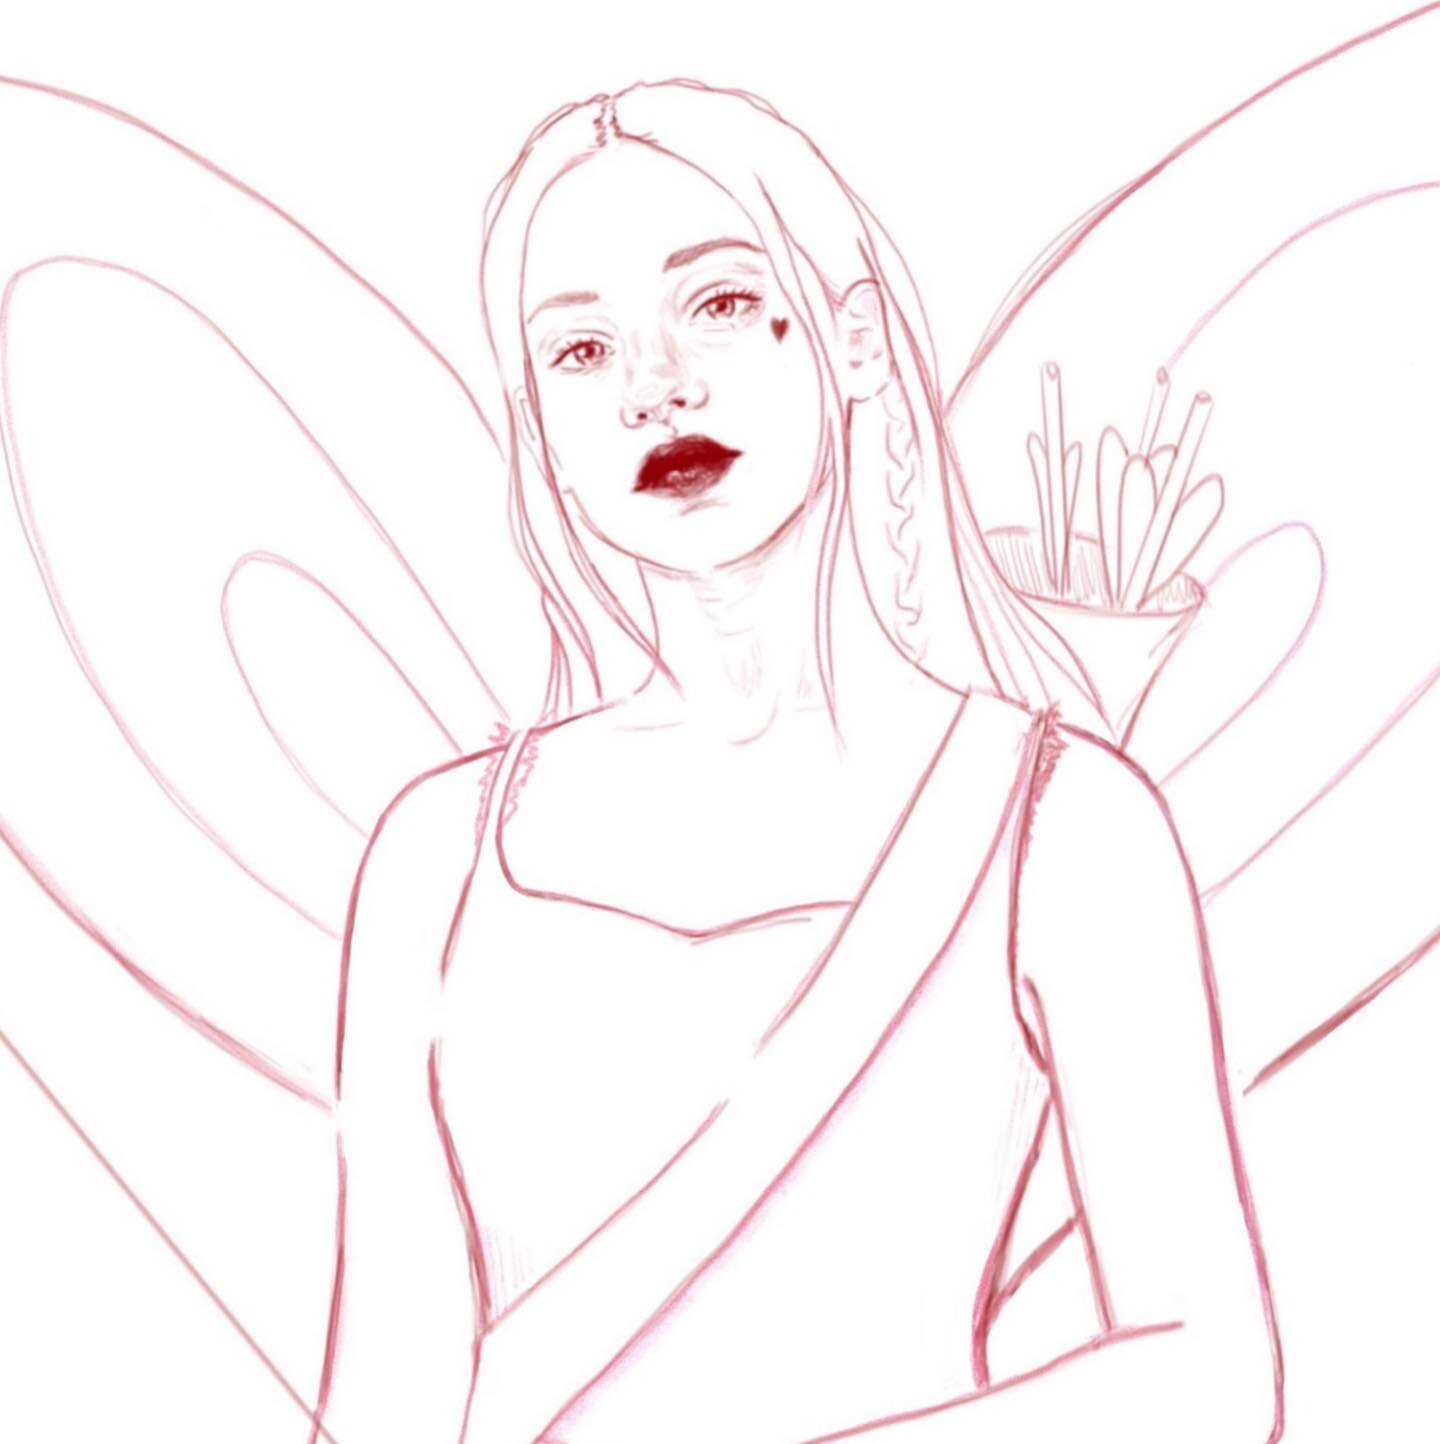 💘 Cupid fairy gal 💘
Valentine&rsquo;s day sketch ❤️
{I&rsquo;m thinking of making her into a paper doll🧚&zwj;♀️}
I hope you had the very best, most love-filled day!